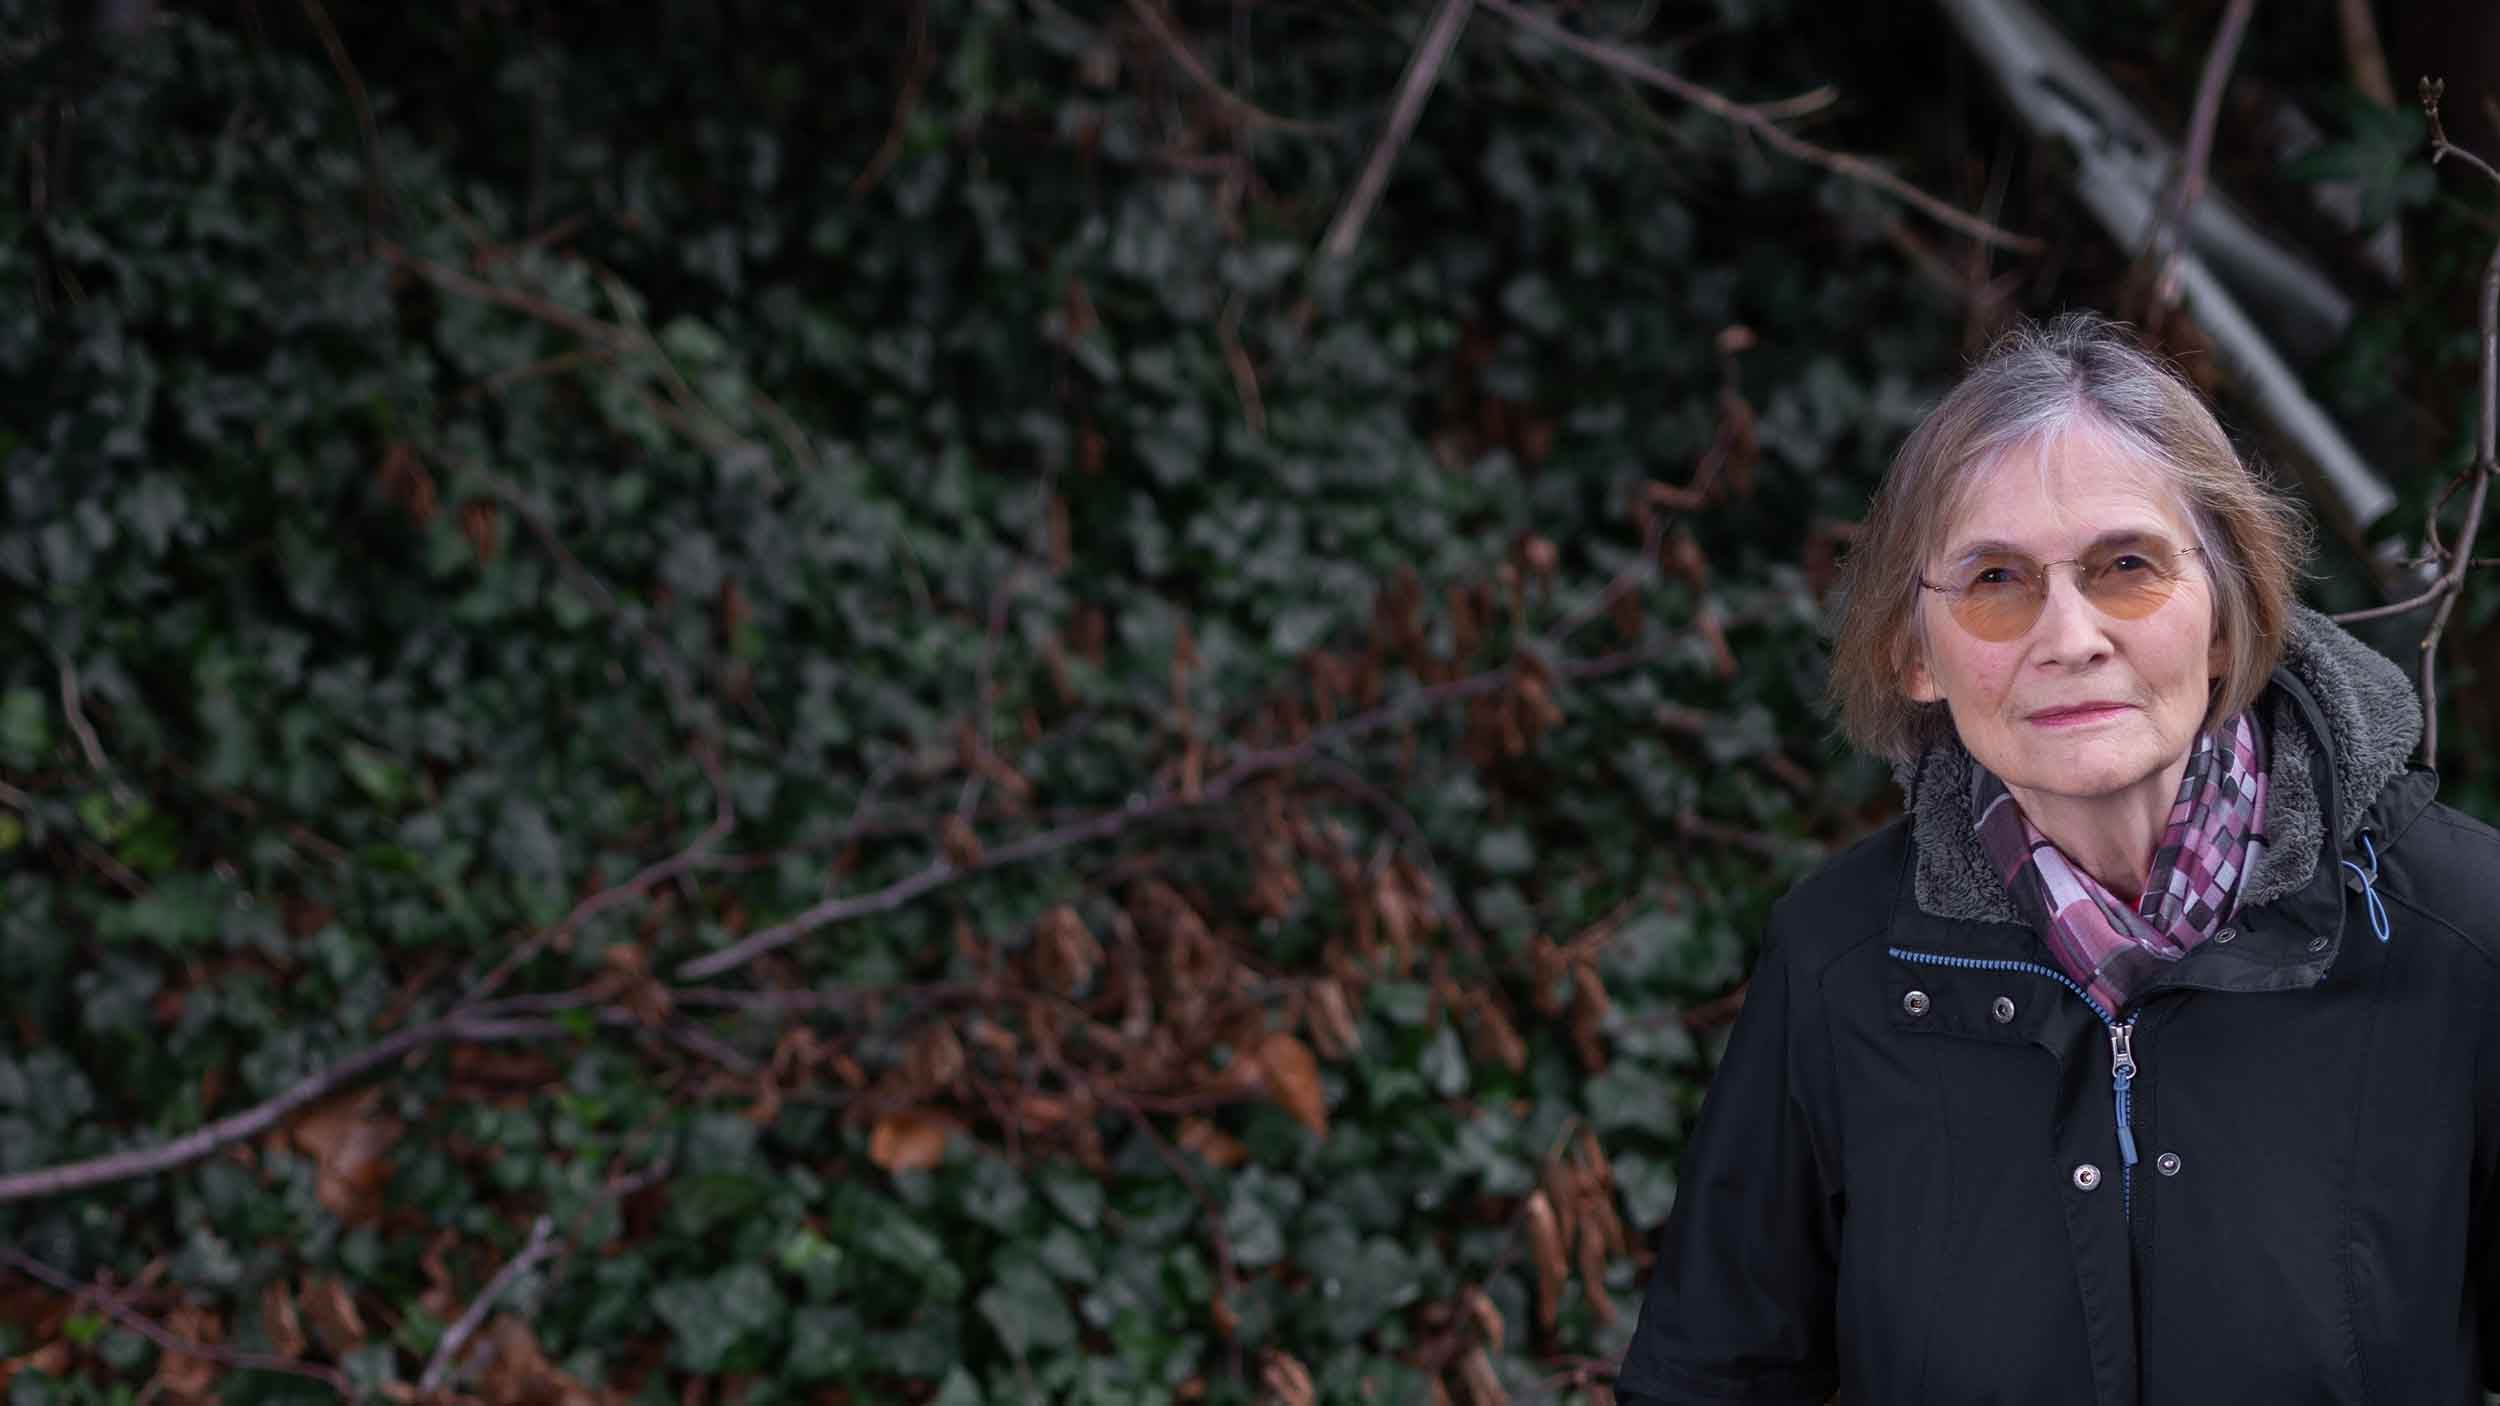 Author Danuta Reah, who has also written as Danuta Kot and Carla Banks, stands in front of undergrowth